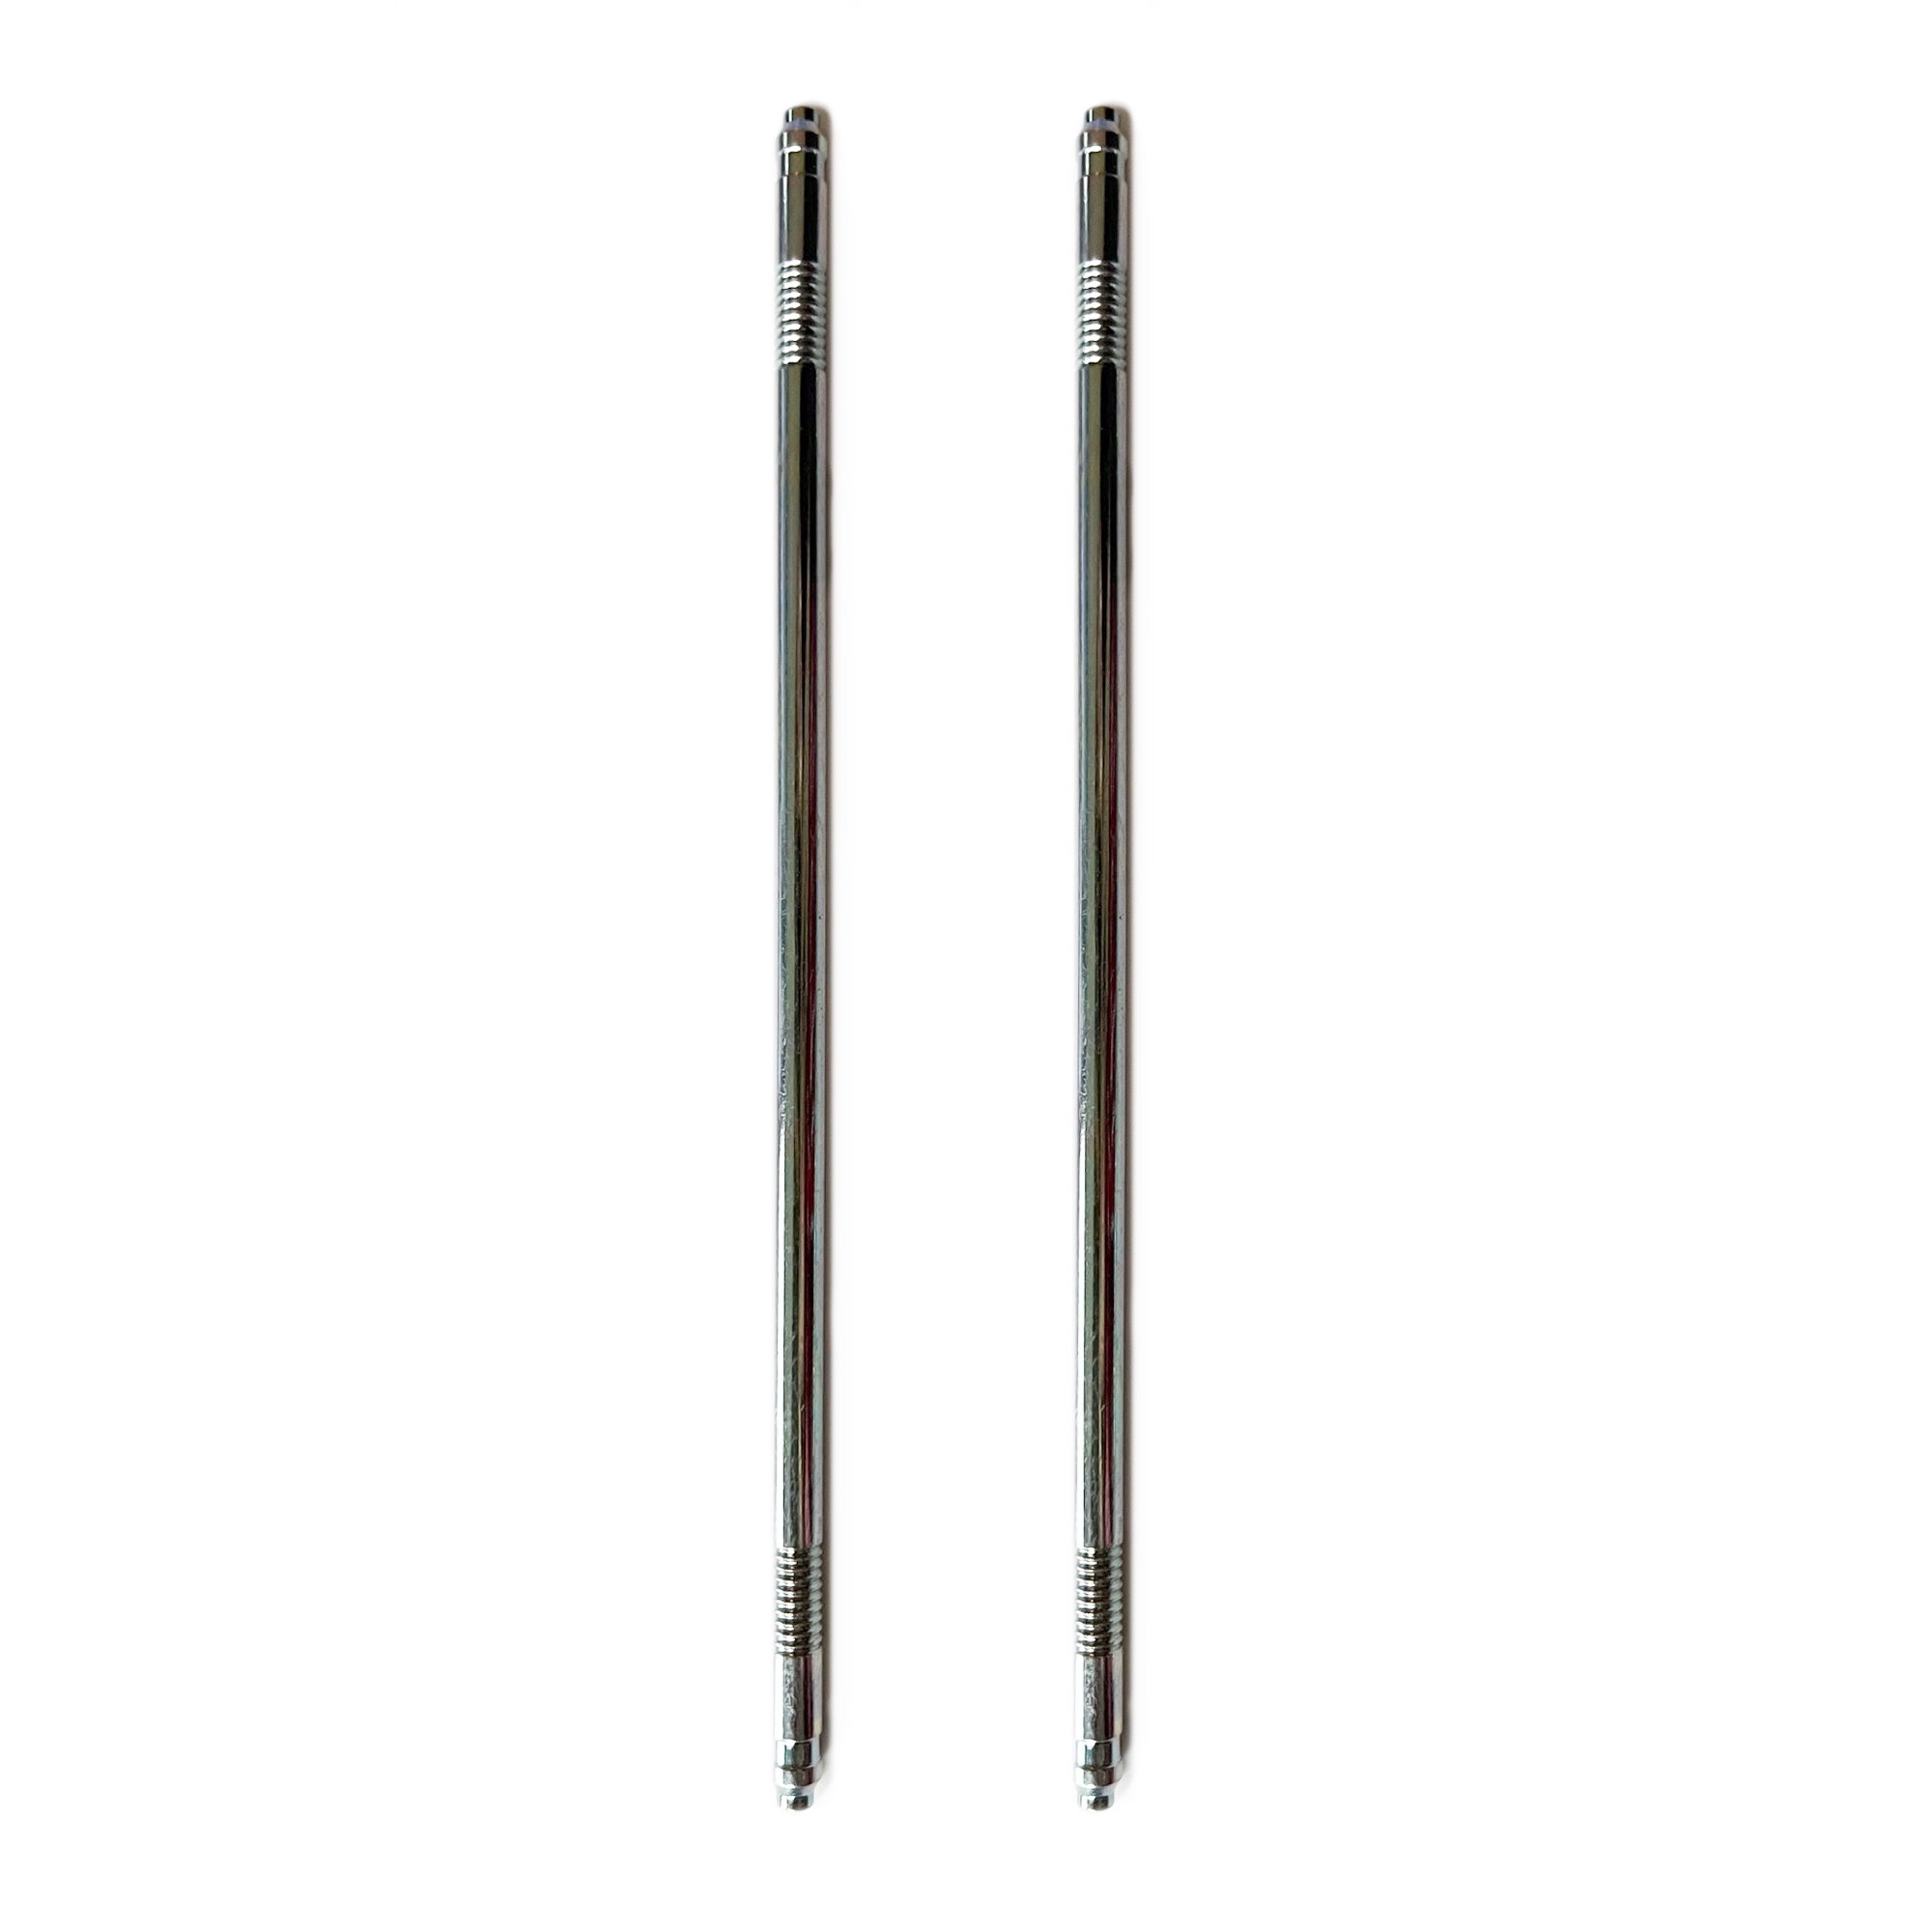 Marcato - Round bar for combs 150 mm - spare part - 2 pieces